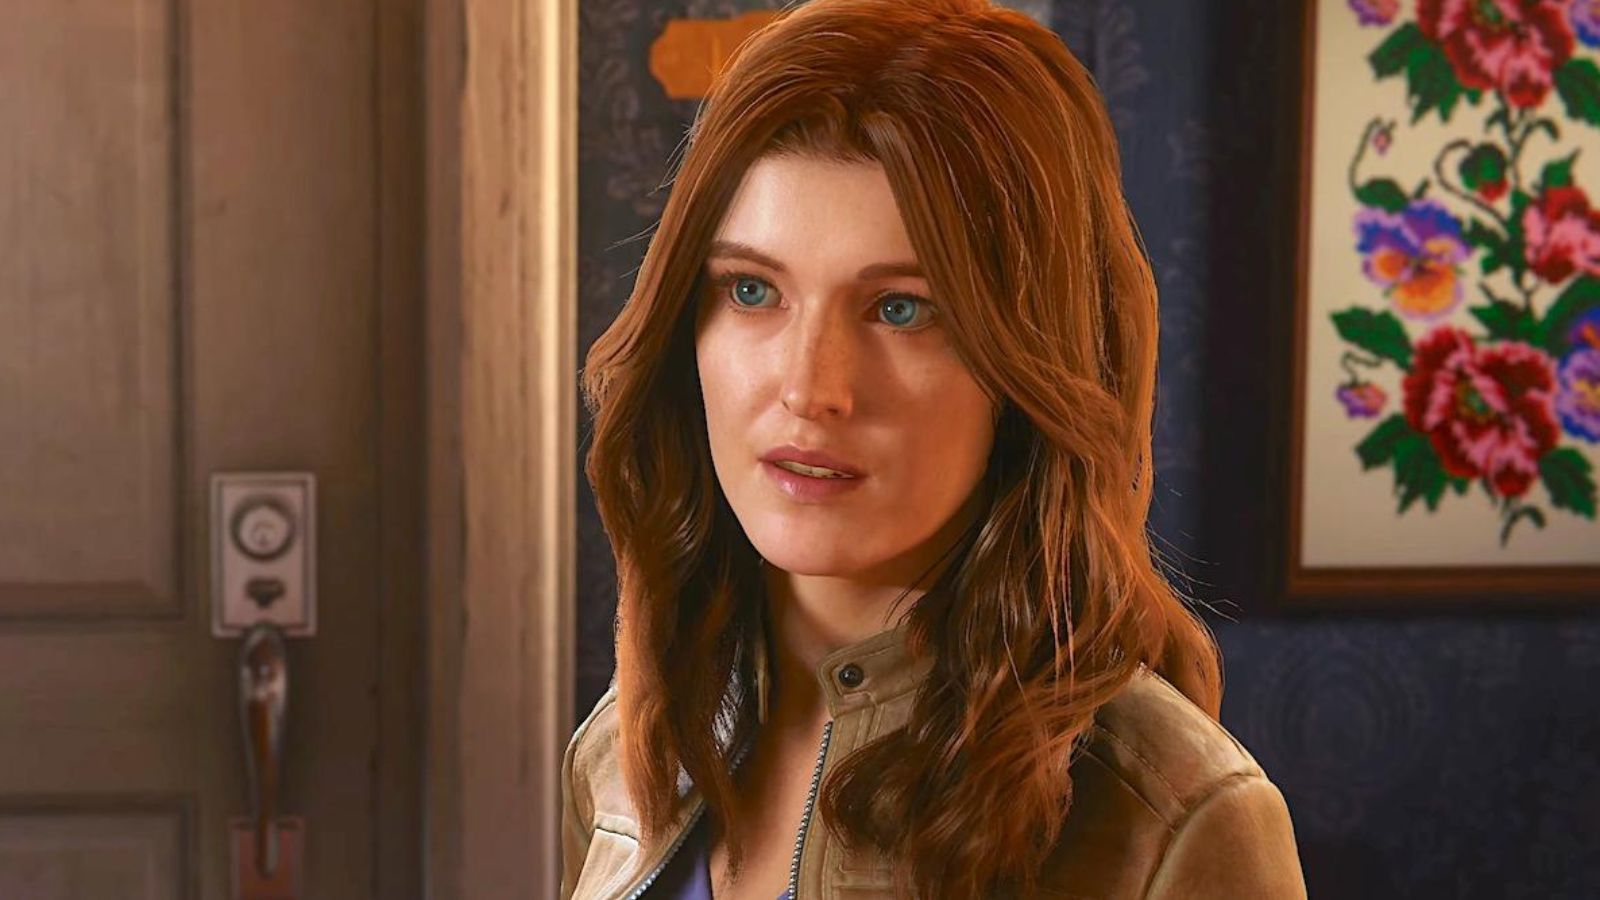 Marvel’s Spider-Man Mary Jane model calls out fans for “stalking” her ...